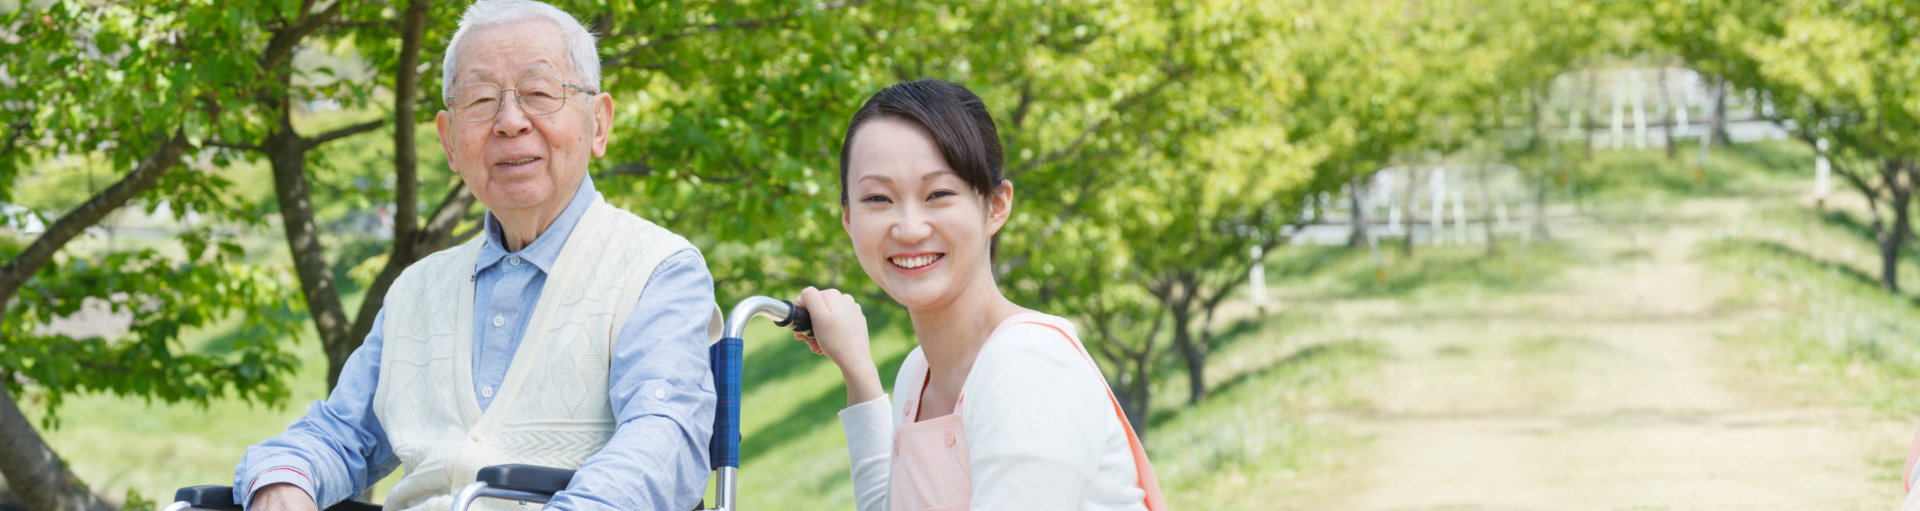 a nurse walking on a park with her patient